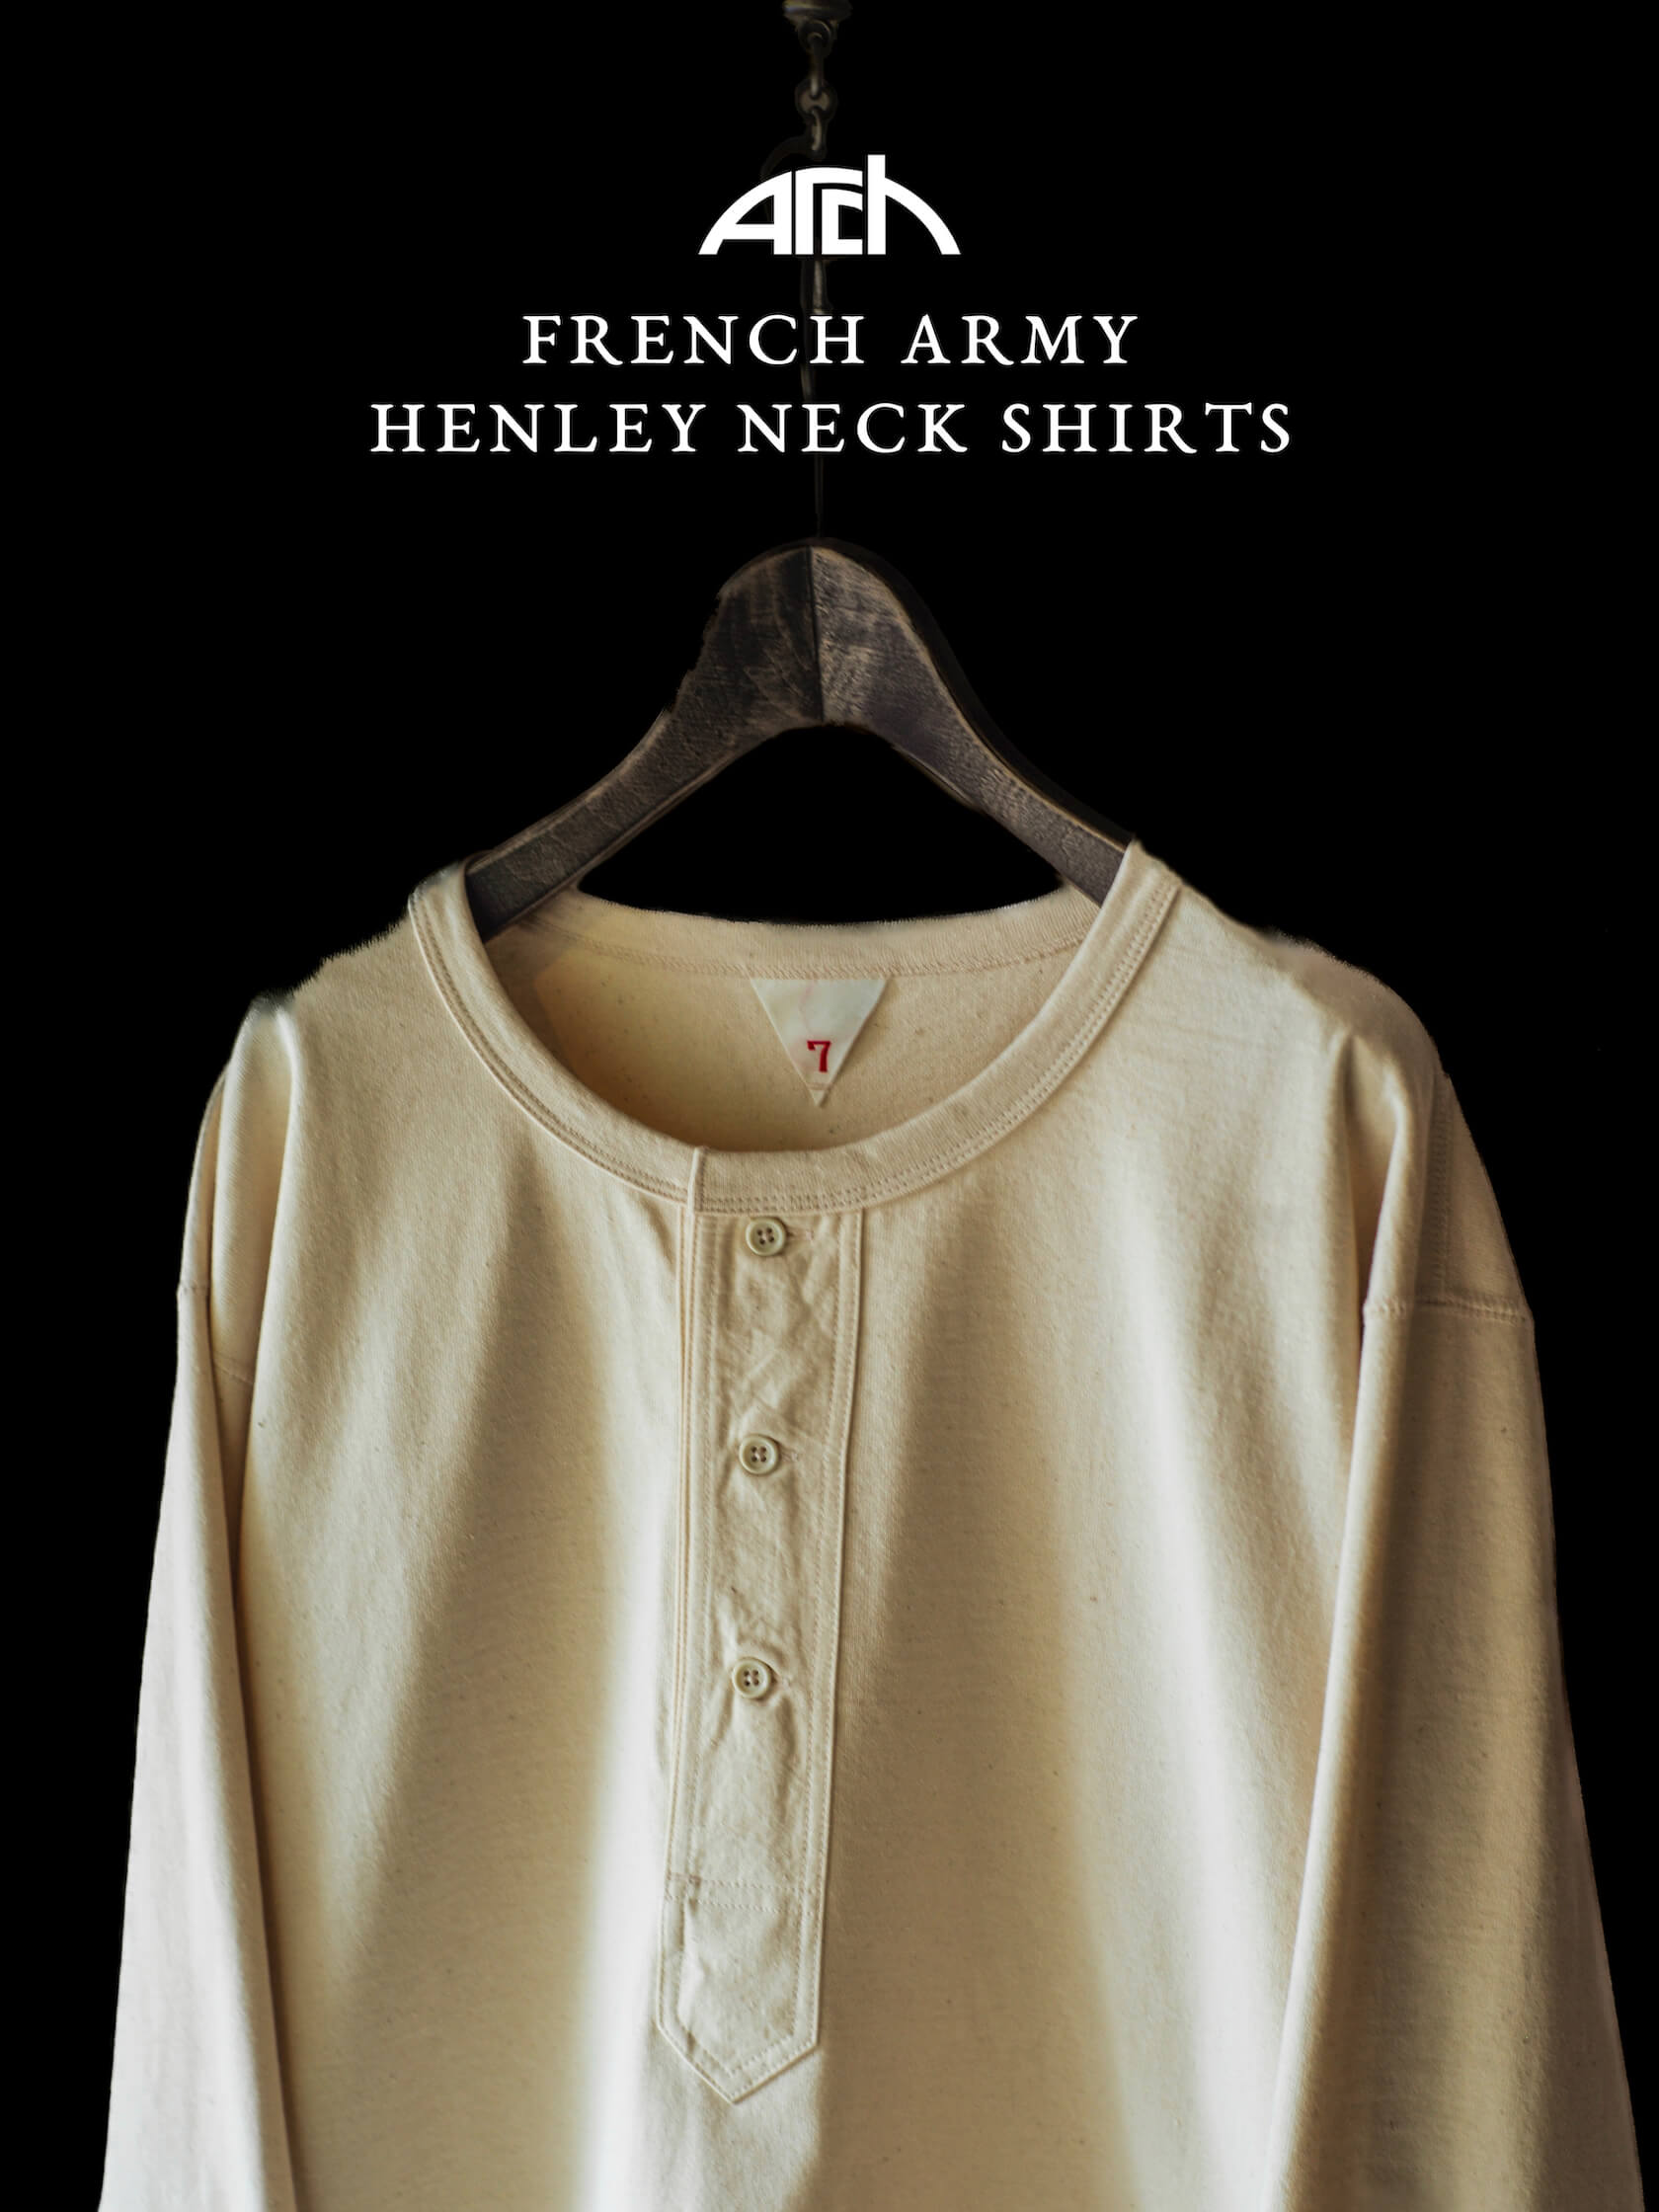 Arch / FRENCH ARMY HENLEY NECK SHIRTS